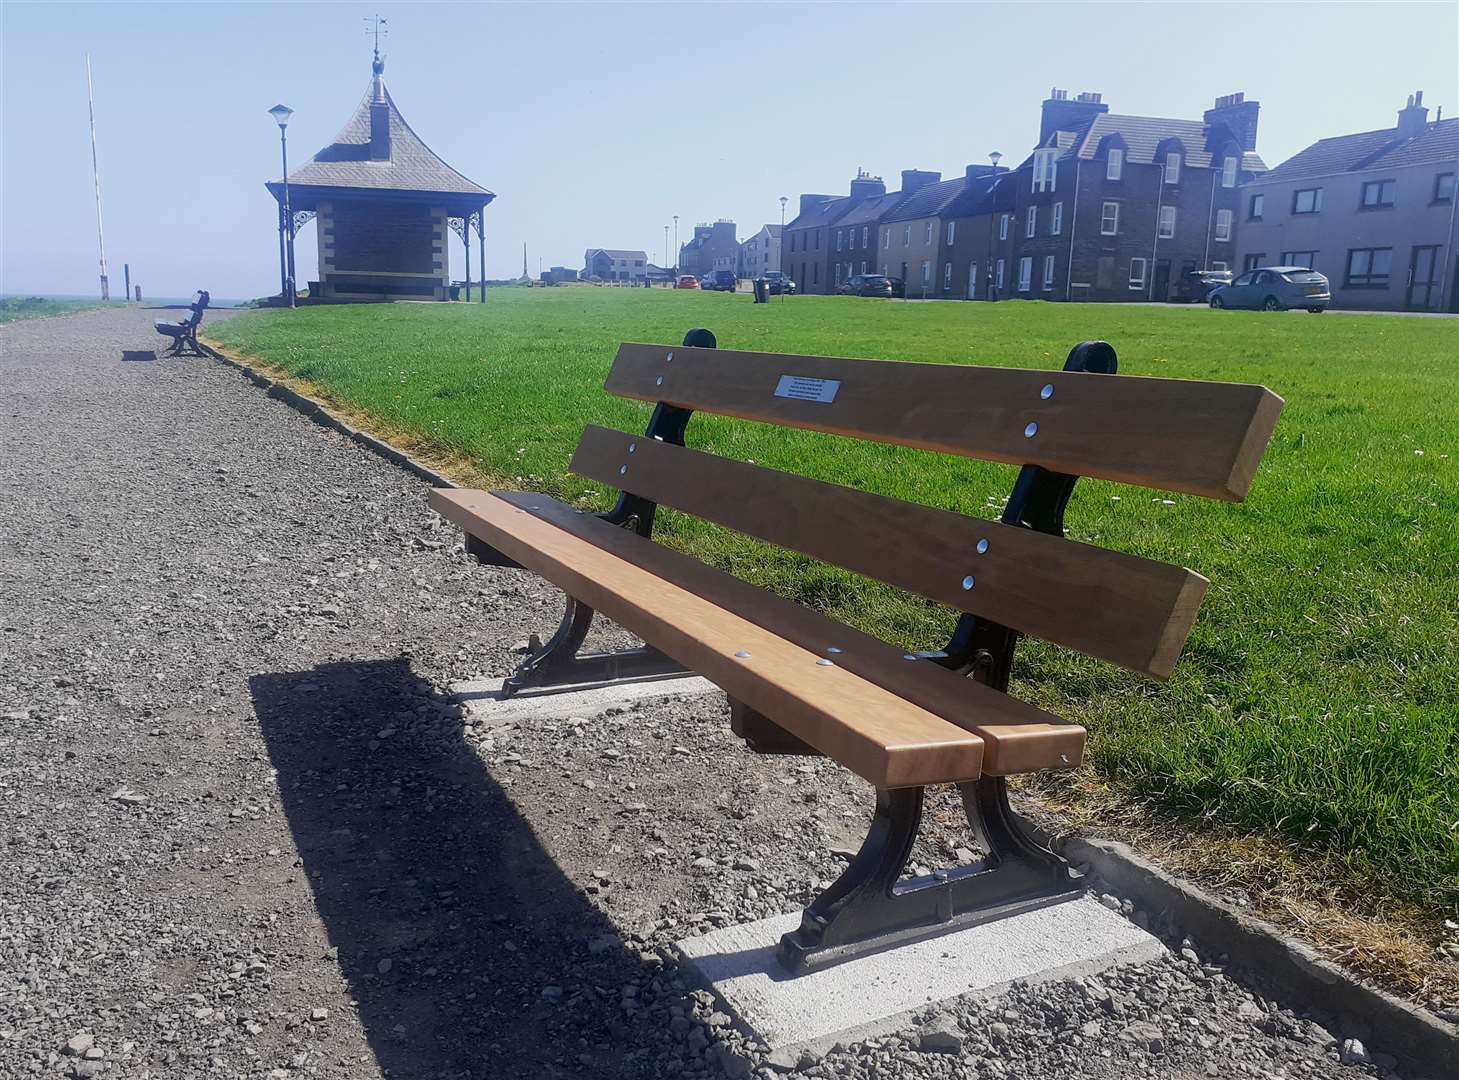 The newly installed bench in memory of David Morrison (1941-2012).